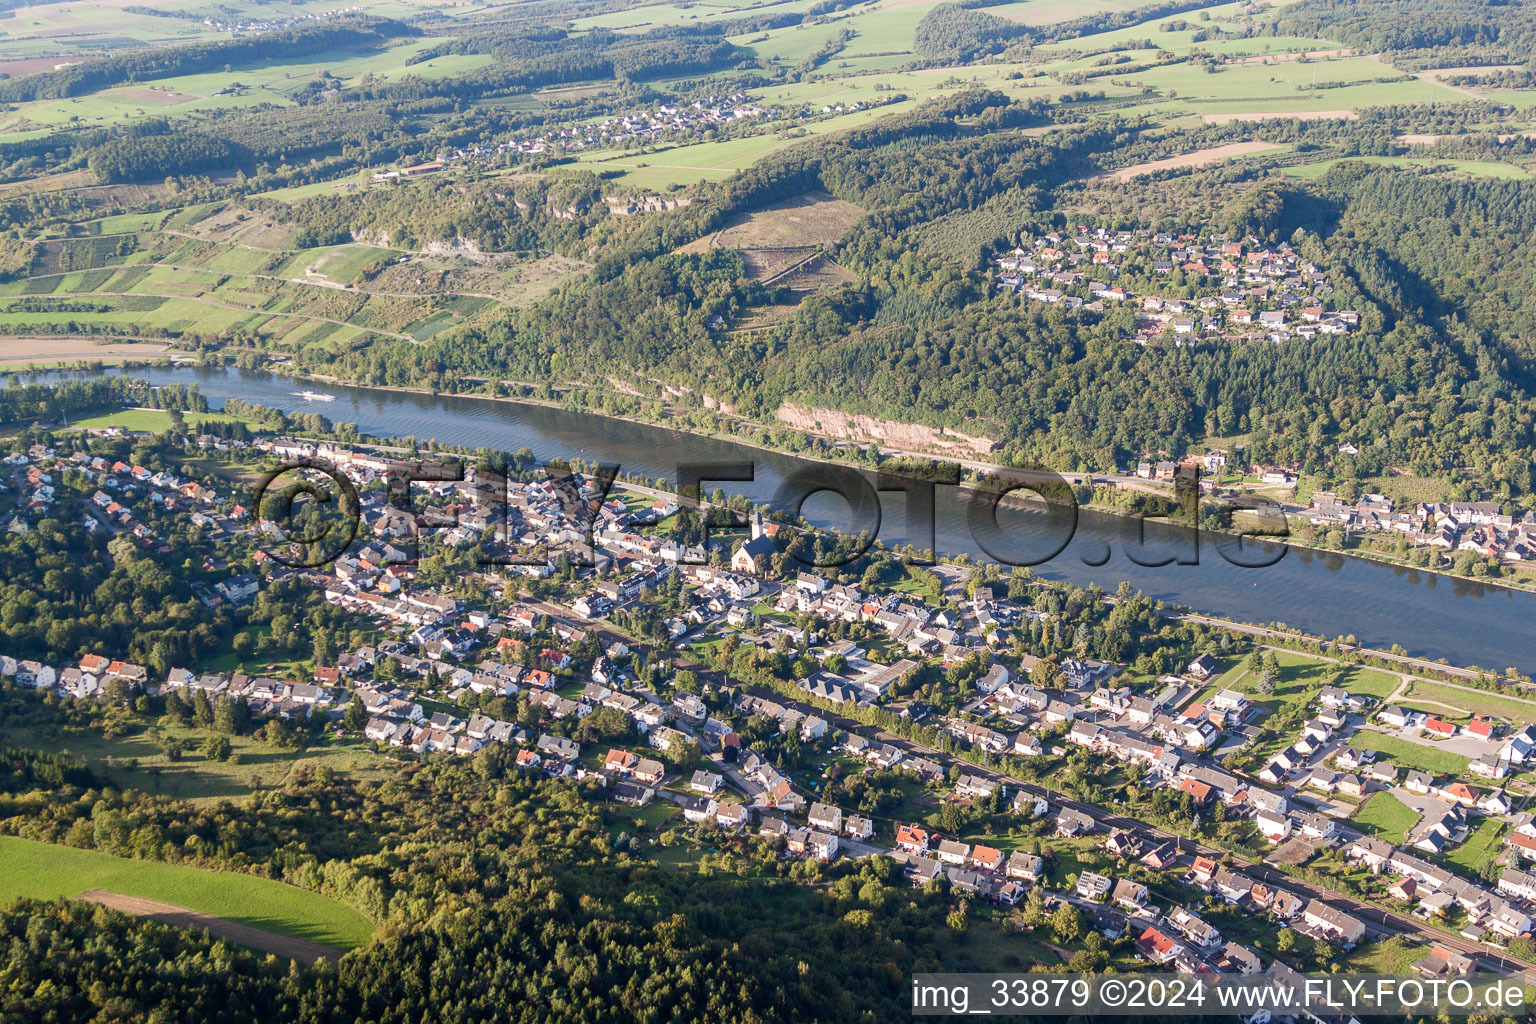 Aerial view of Village on the river bank areas in Wasserliesch in the state Rhineland-Palatinate, Germany